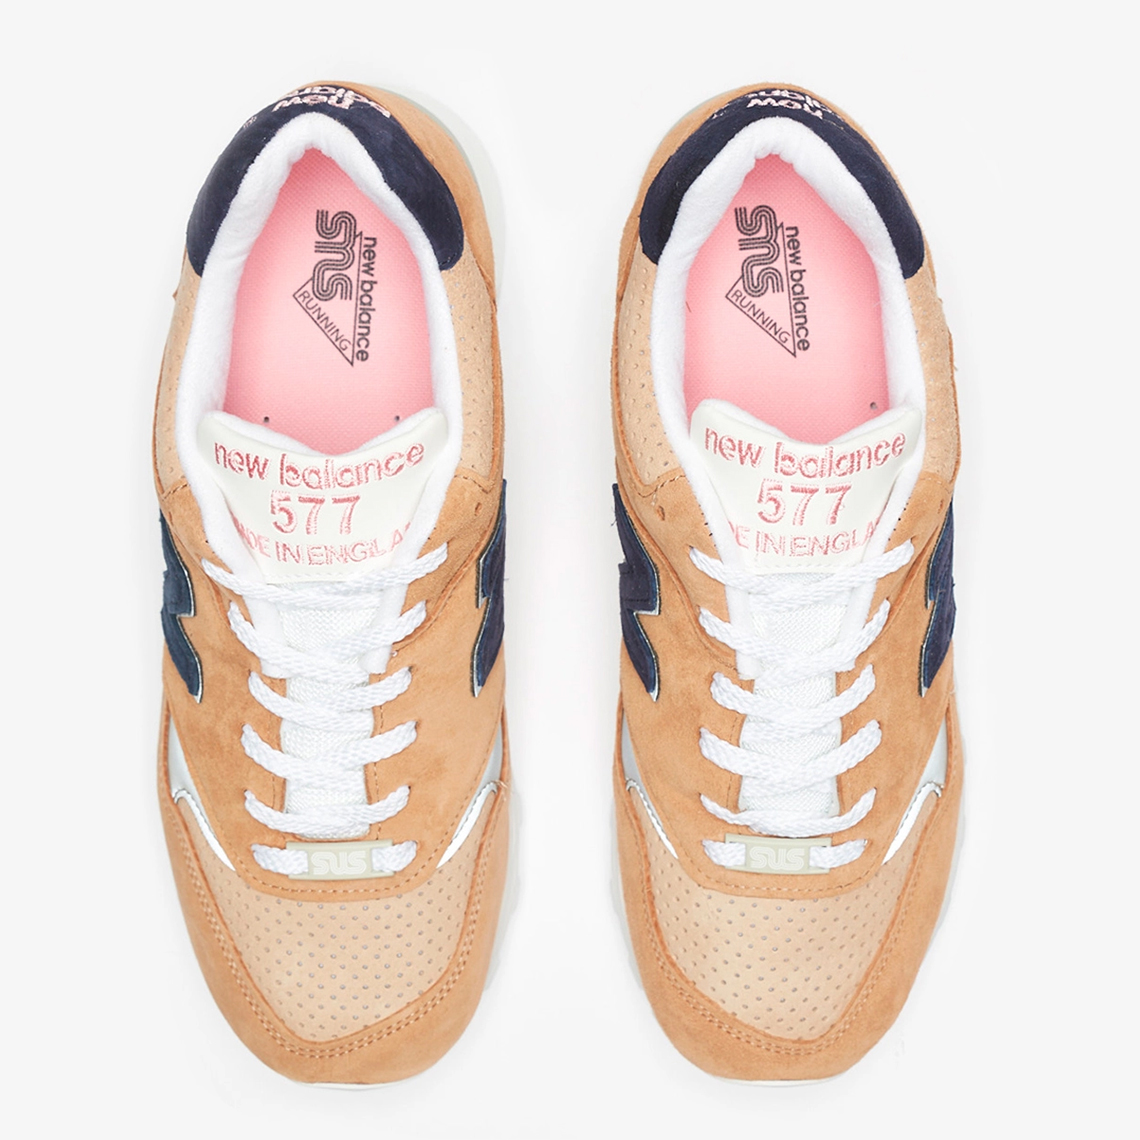 Sneakersnstuff new balance m992af made in the usa Release Date 12